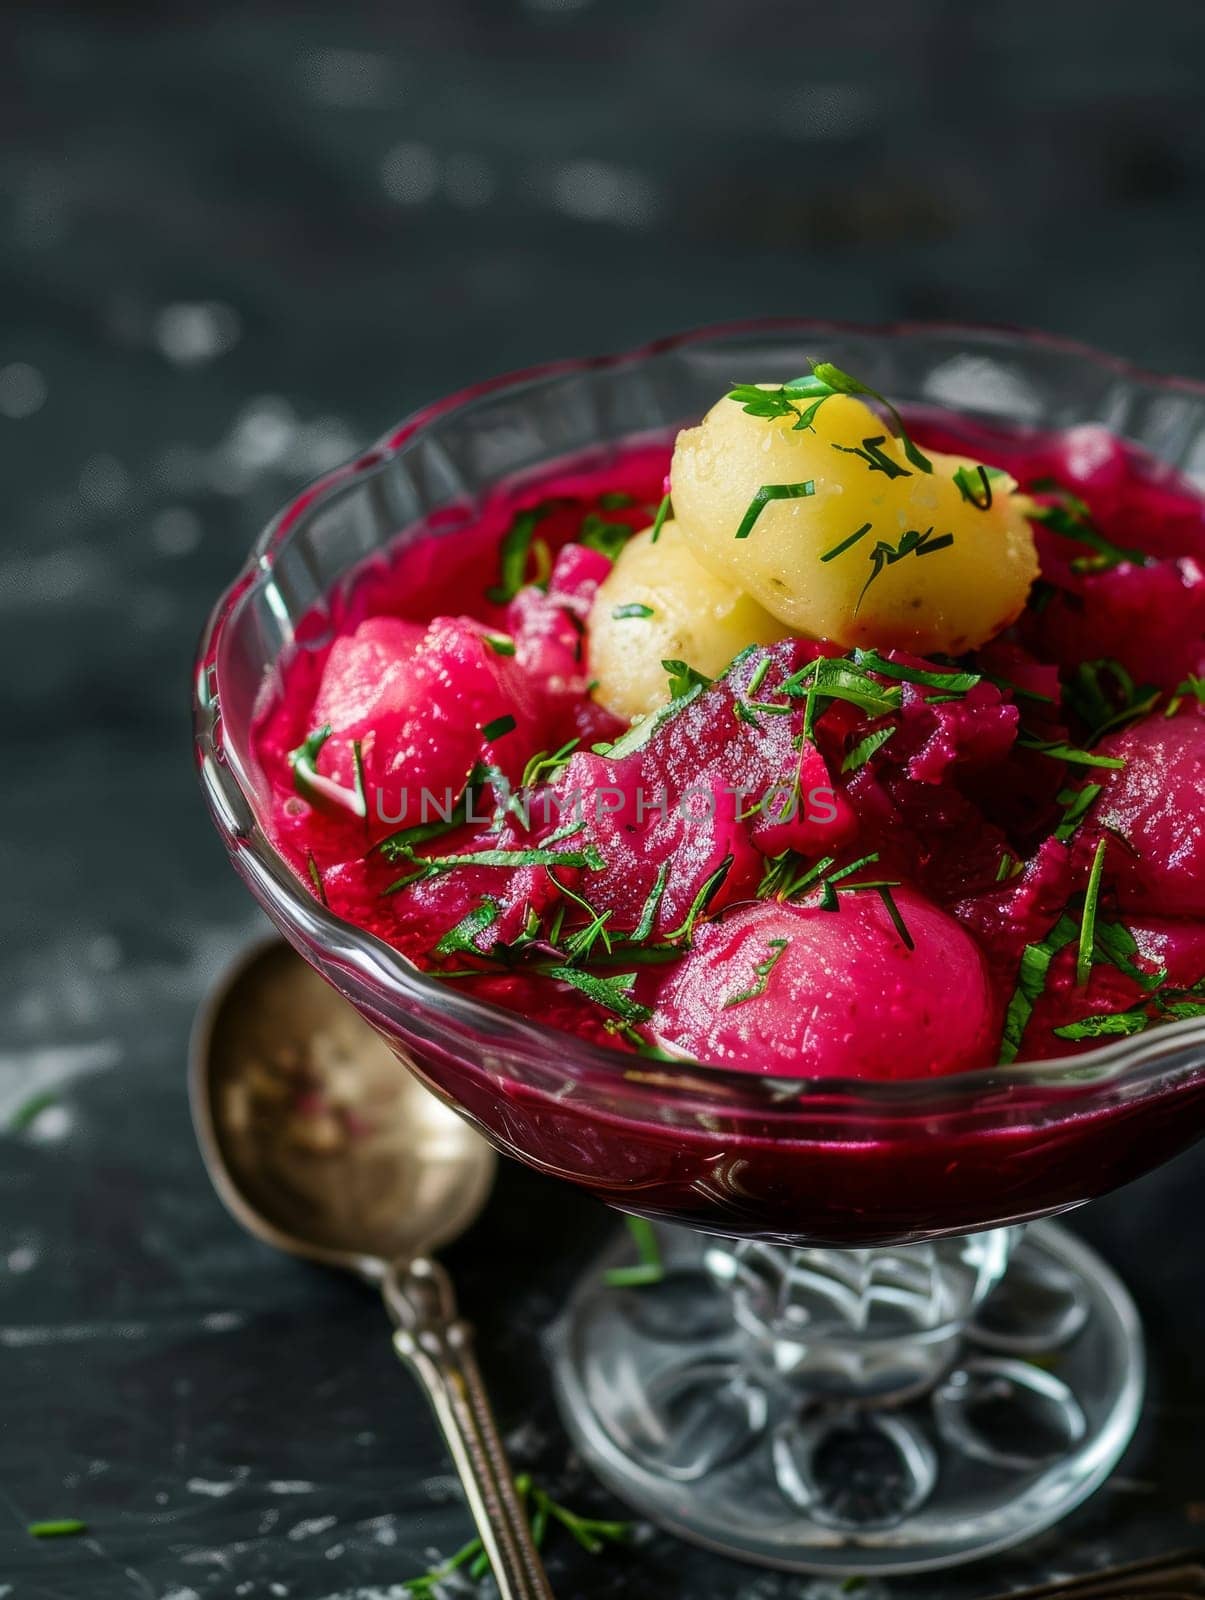 Lithuanian saltibarsciai borscht, a cold beet soup, served in a glass bowl with boiled potatoes. A refreshing and traditional summer dish from Lithuania. by sfinks